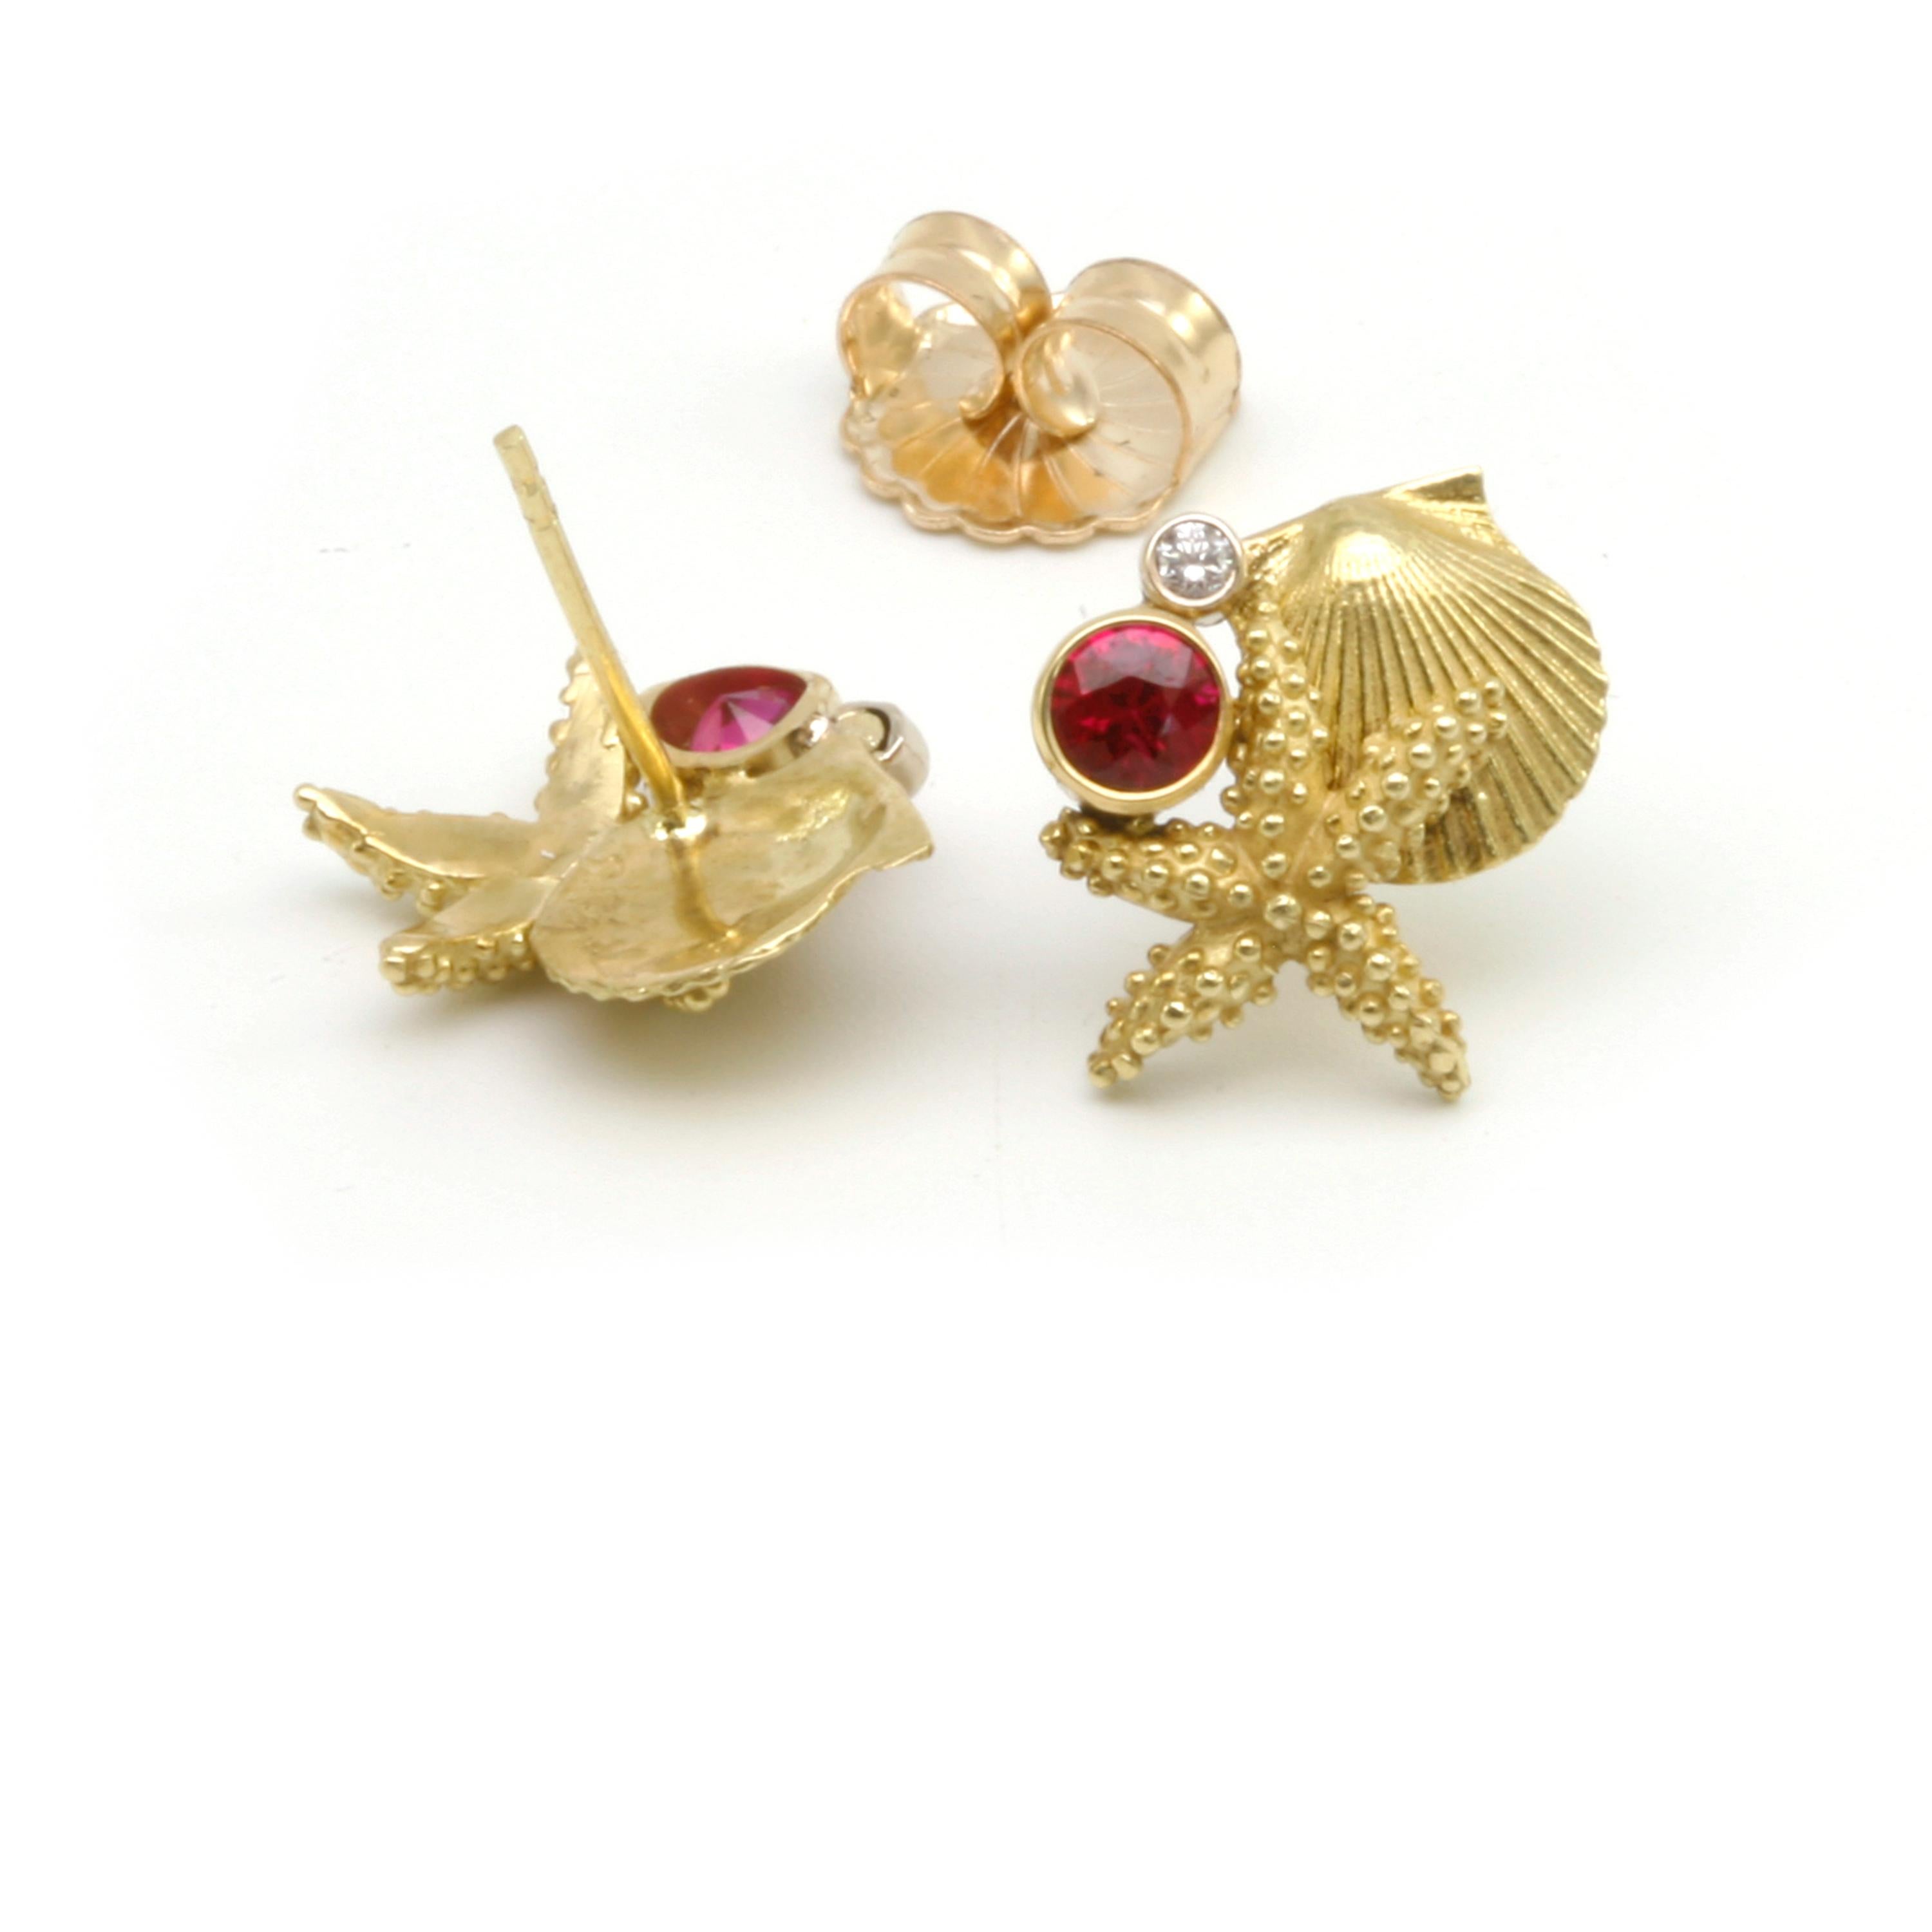 Round Cut Diana Kim England Starfish, Scallop, Ruby, and Diamond Earrings in 18k For Sale